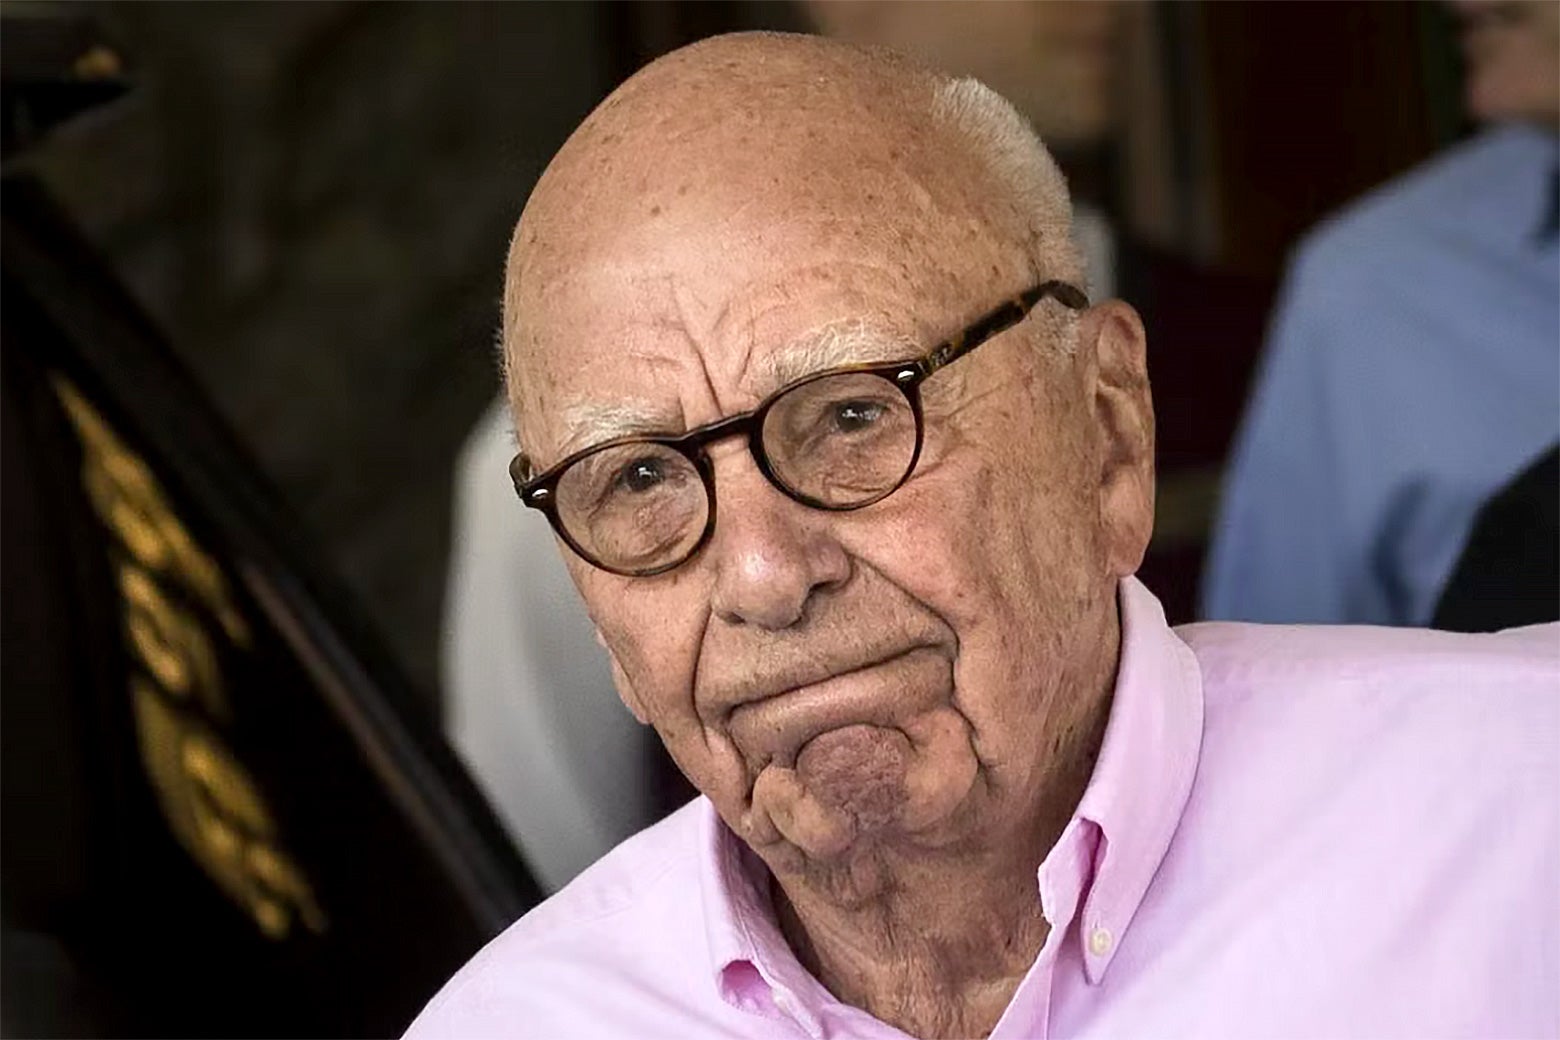 Rupert Murdoch with a serious expression on his face wearing a light blue Polo button down shirt.